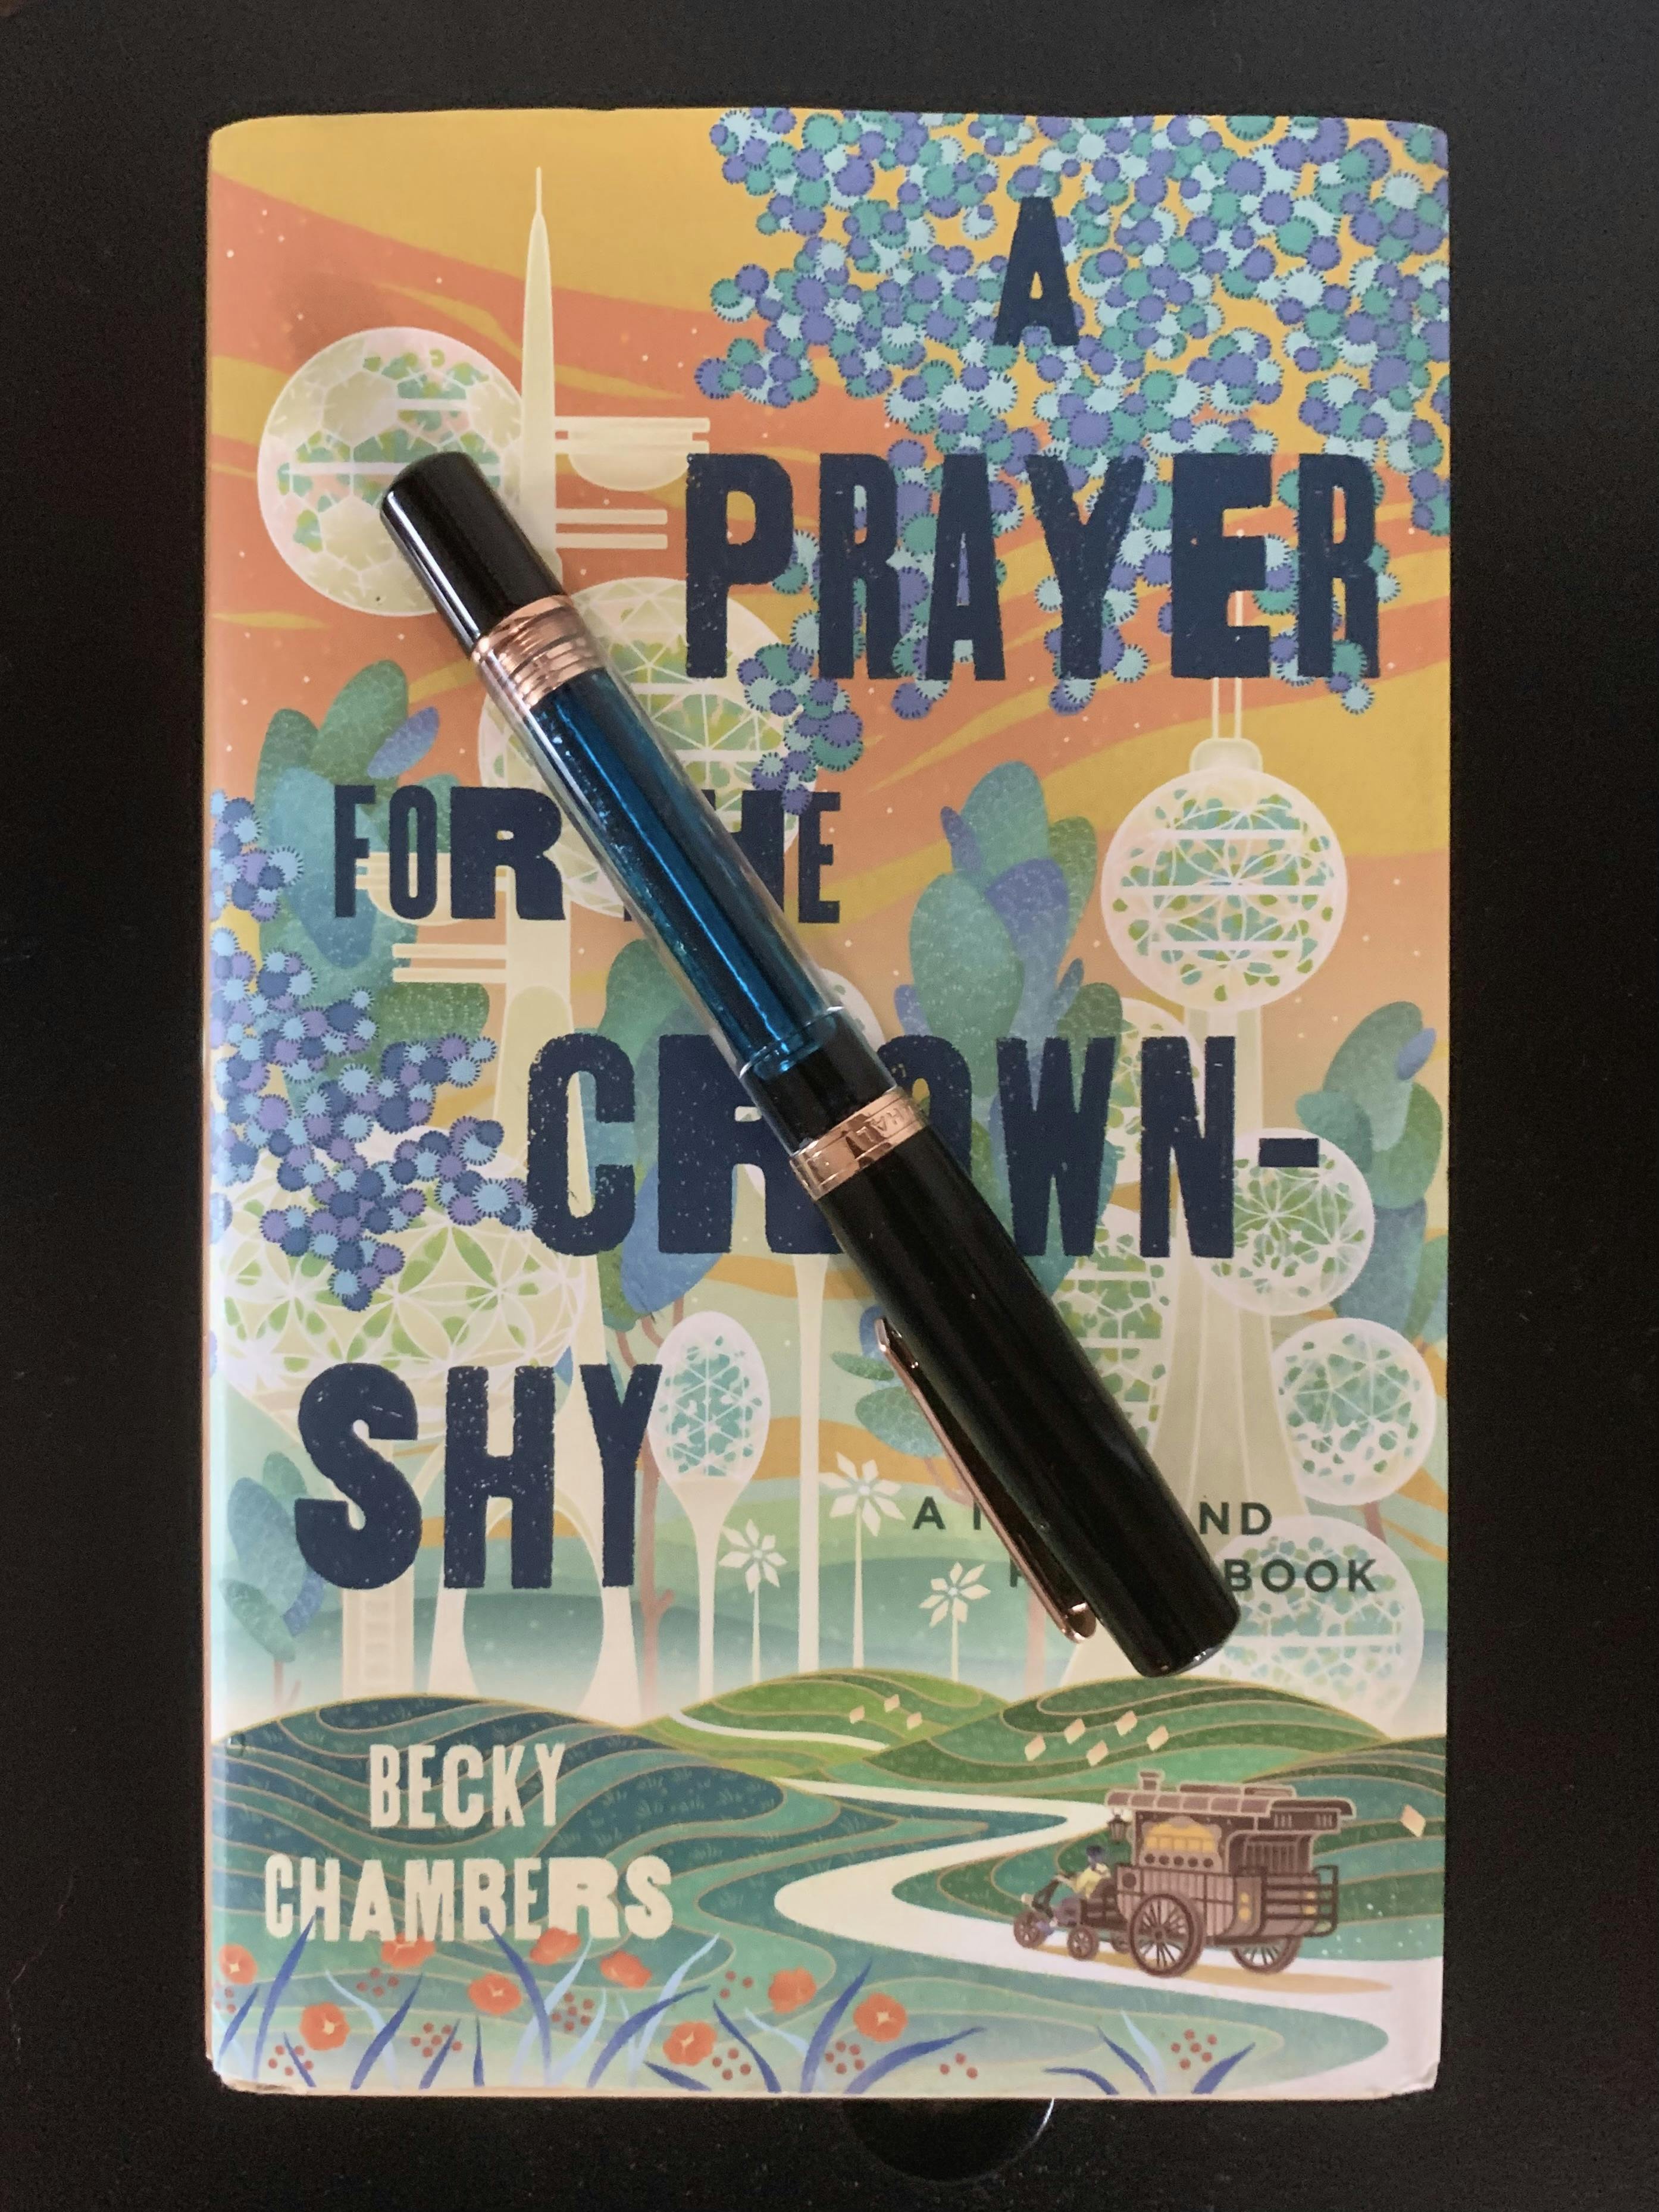 A fountain pen rests on the cover a book. The pen is a Nahvalur Original Plus, a partially-transparent 'demonstrator' pen. The book is 'A Prayer for the Crown-Shy' by Becky Chambers. The gold, blue, and green color scheme of the cover illustration matches the gold banding on the pen and the turquoise ink it's filled with. 